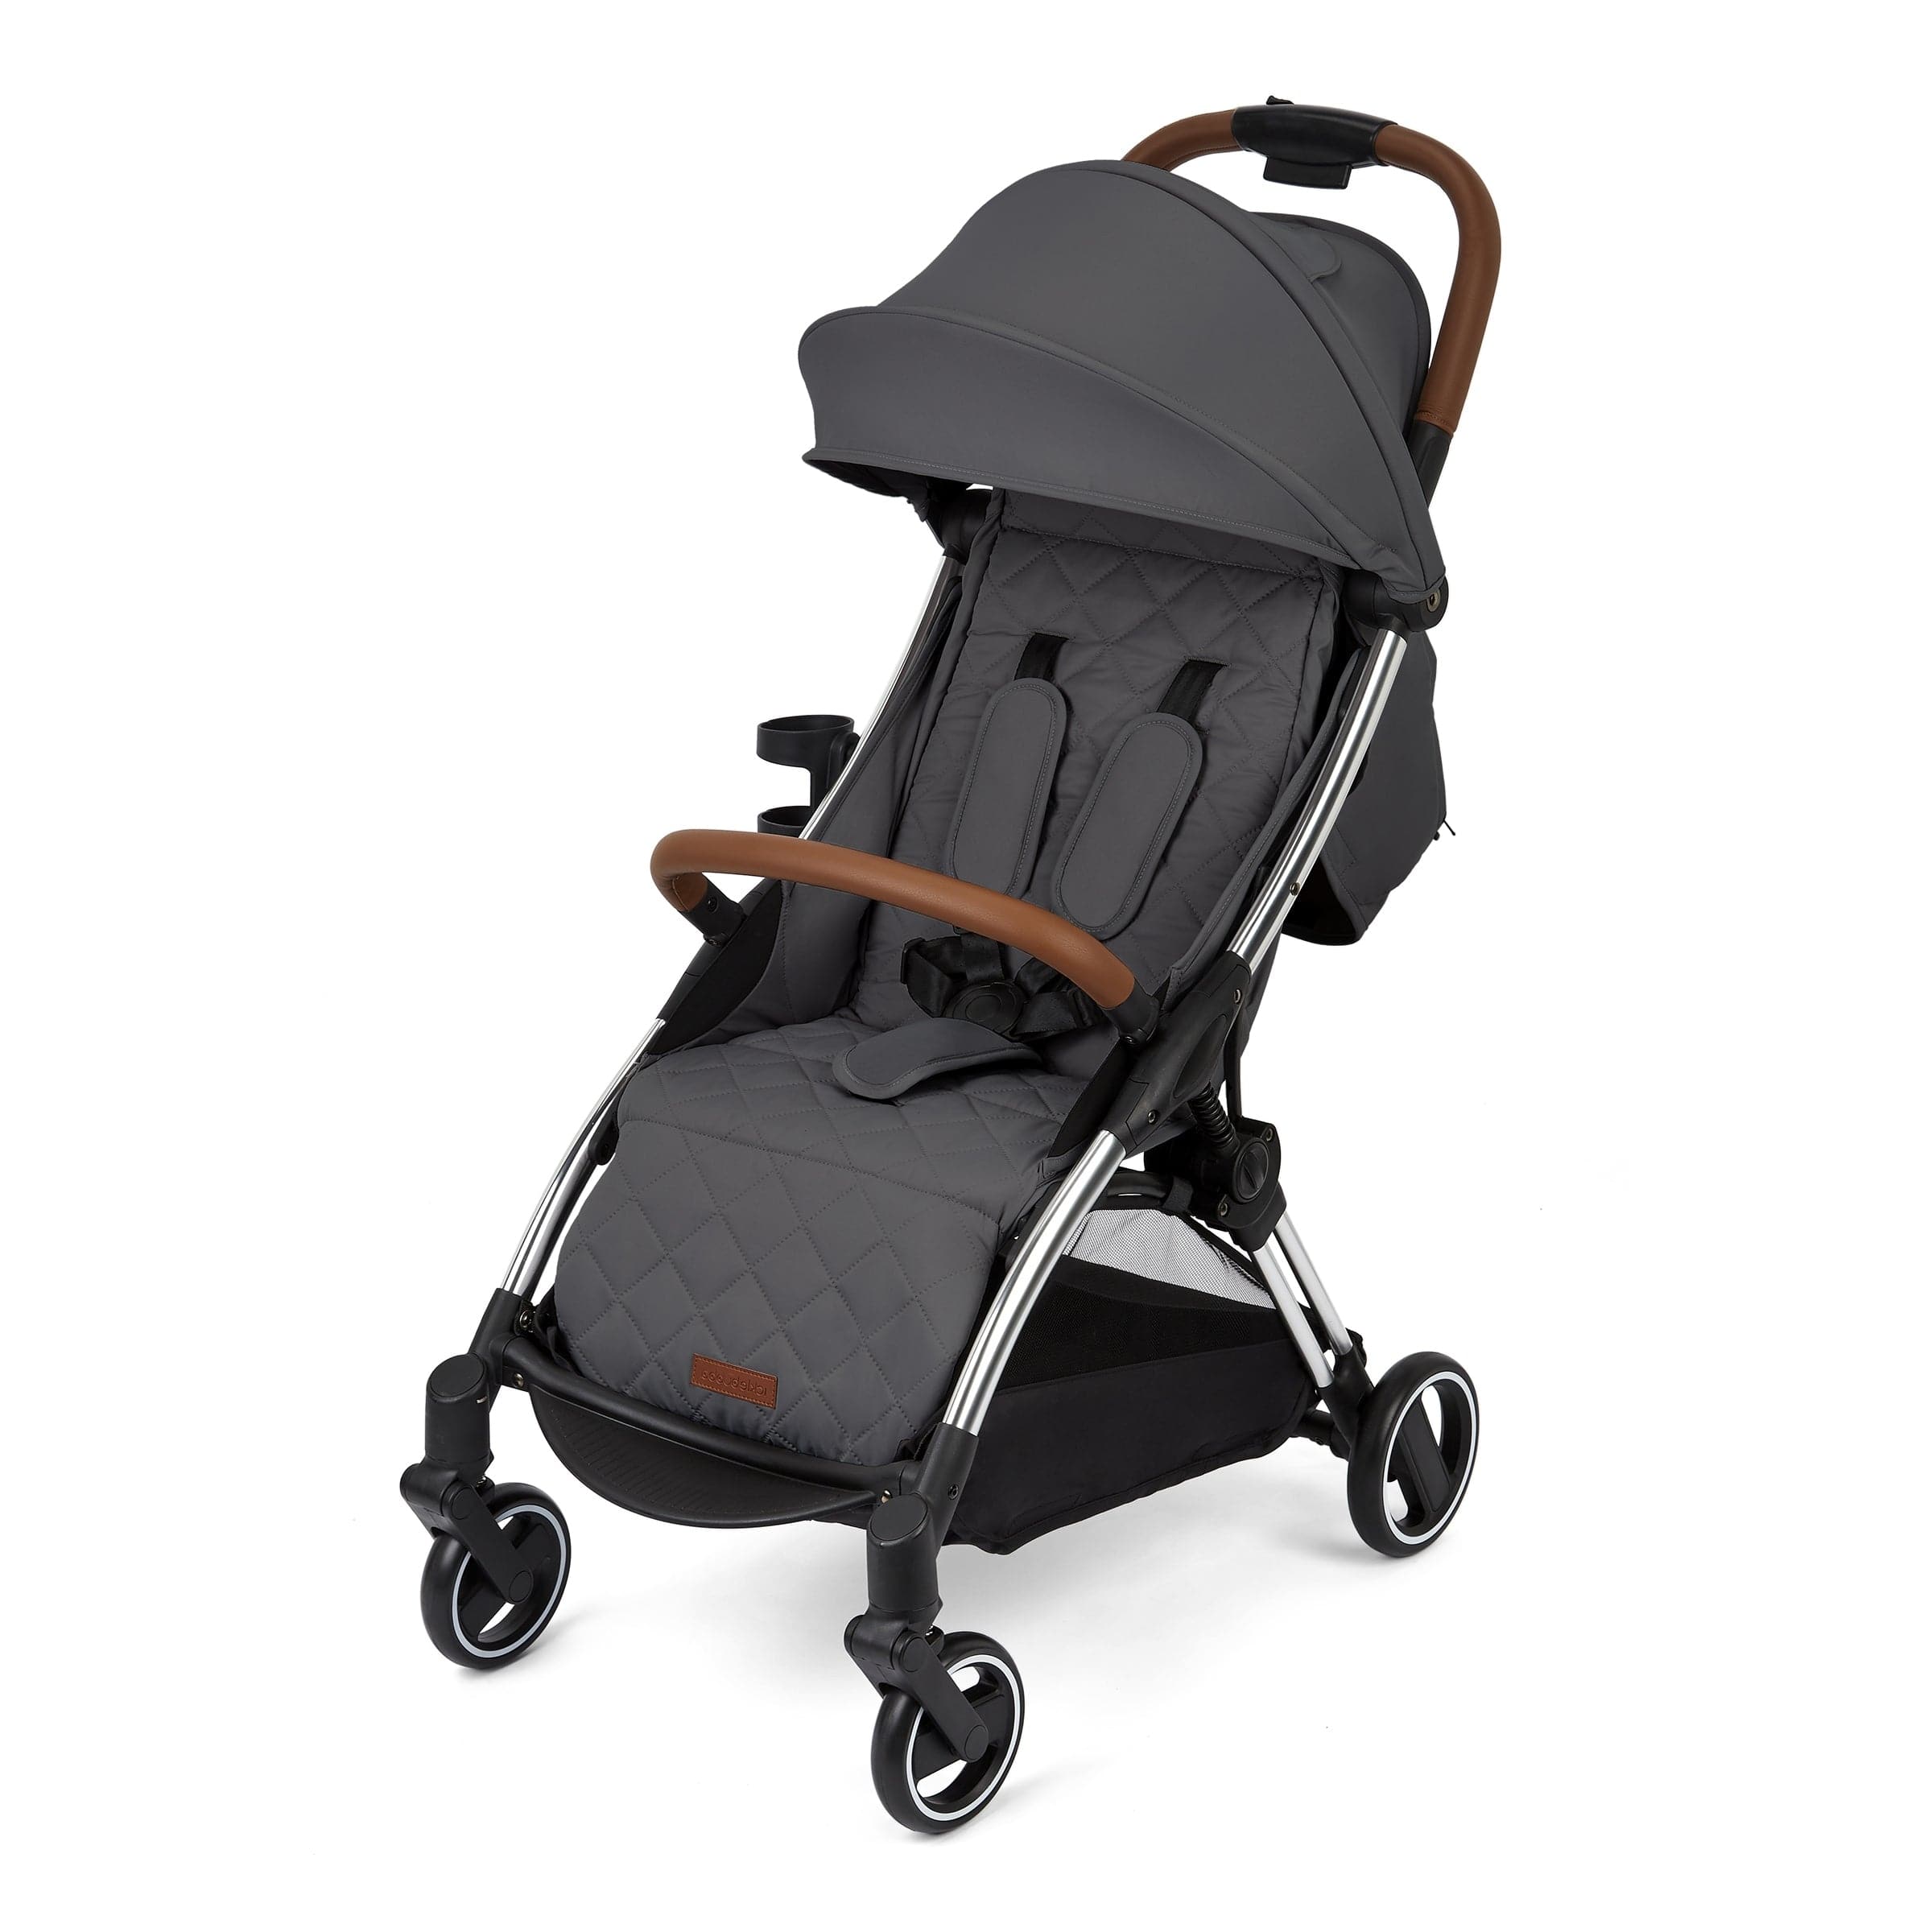 Ickle Bubba Gravity Max Pushchair - Graphite Grey - For Your Little One